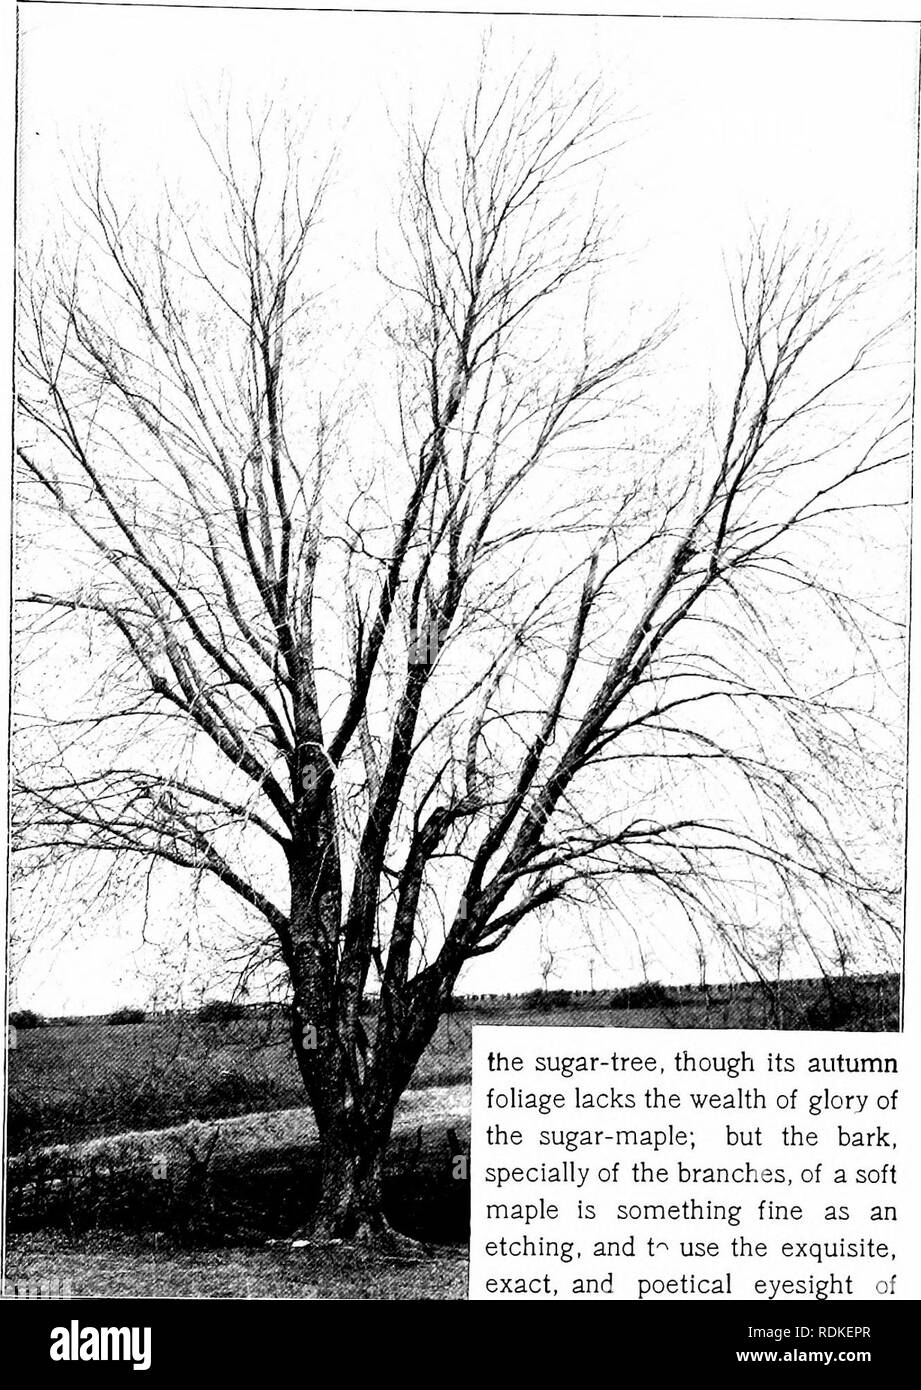 . In God's out-of-doors. Natural history. Jj-AZ?^ the sugar-tree, though its autumn foliage lacks the wealth of glory of the sugar-maple; but the bark, specially of the branches, of a soft maple is something fine as an etching, and t-^ use the exquisite, exact, and poetical eyesight of MAPLE &quot;Gert Jan Ridd&quot; (than whom, none, not even Ruskin, sees nature with surer fidelity), is &quot;like the bottom of a red doe's foot.&quot; 1 can not speak of the maple bark to effect, nor can it be photographed, nor painted, but I love to look on its finished beauty by the hour, and hold my hand on Stock Photo